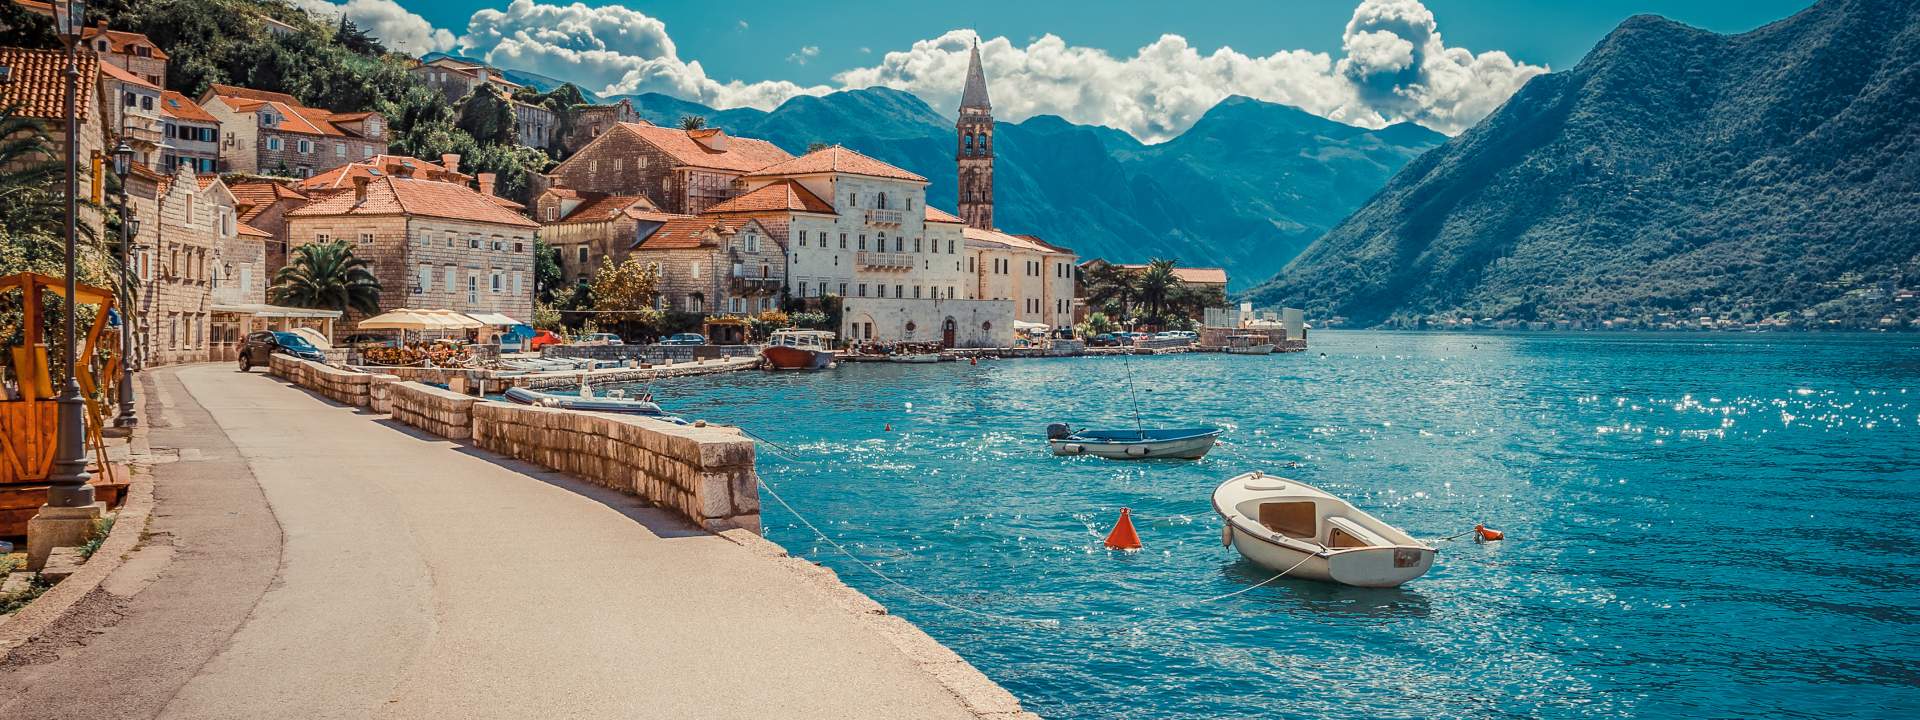 Explore Montenegro on a traditional gulet cruise